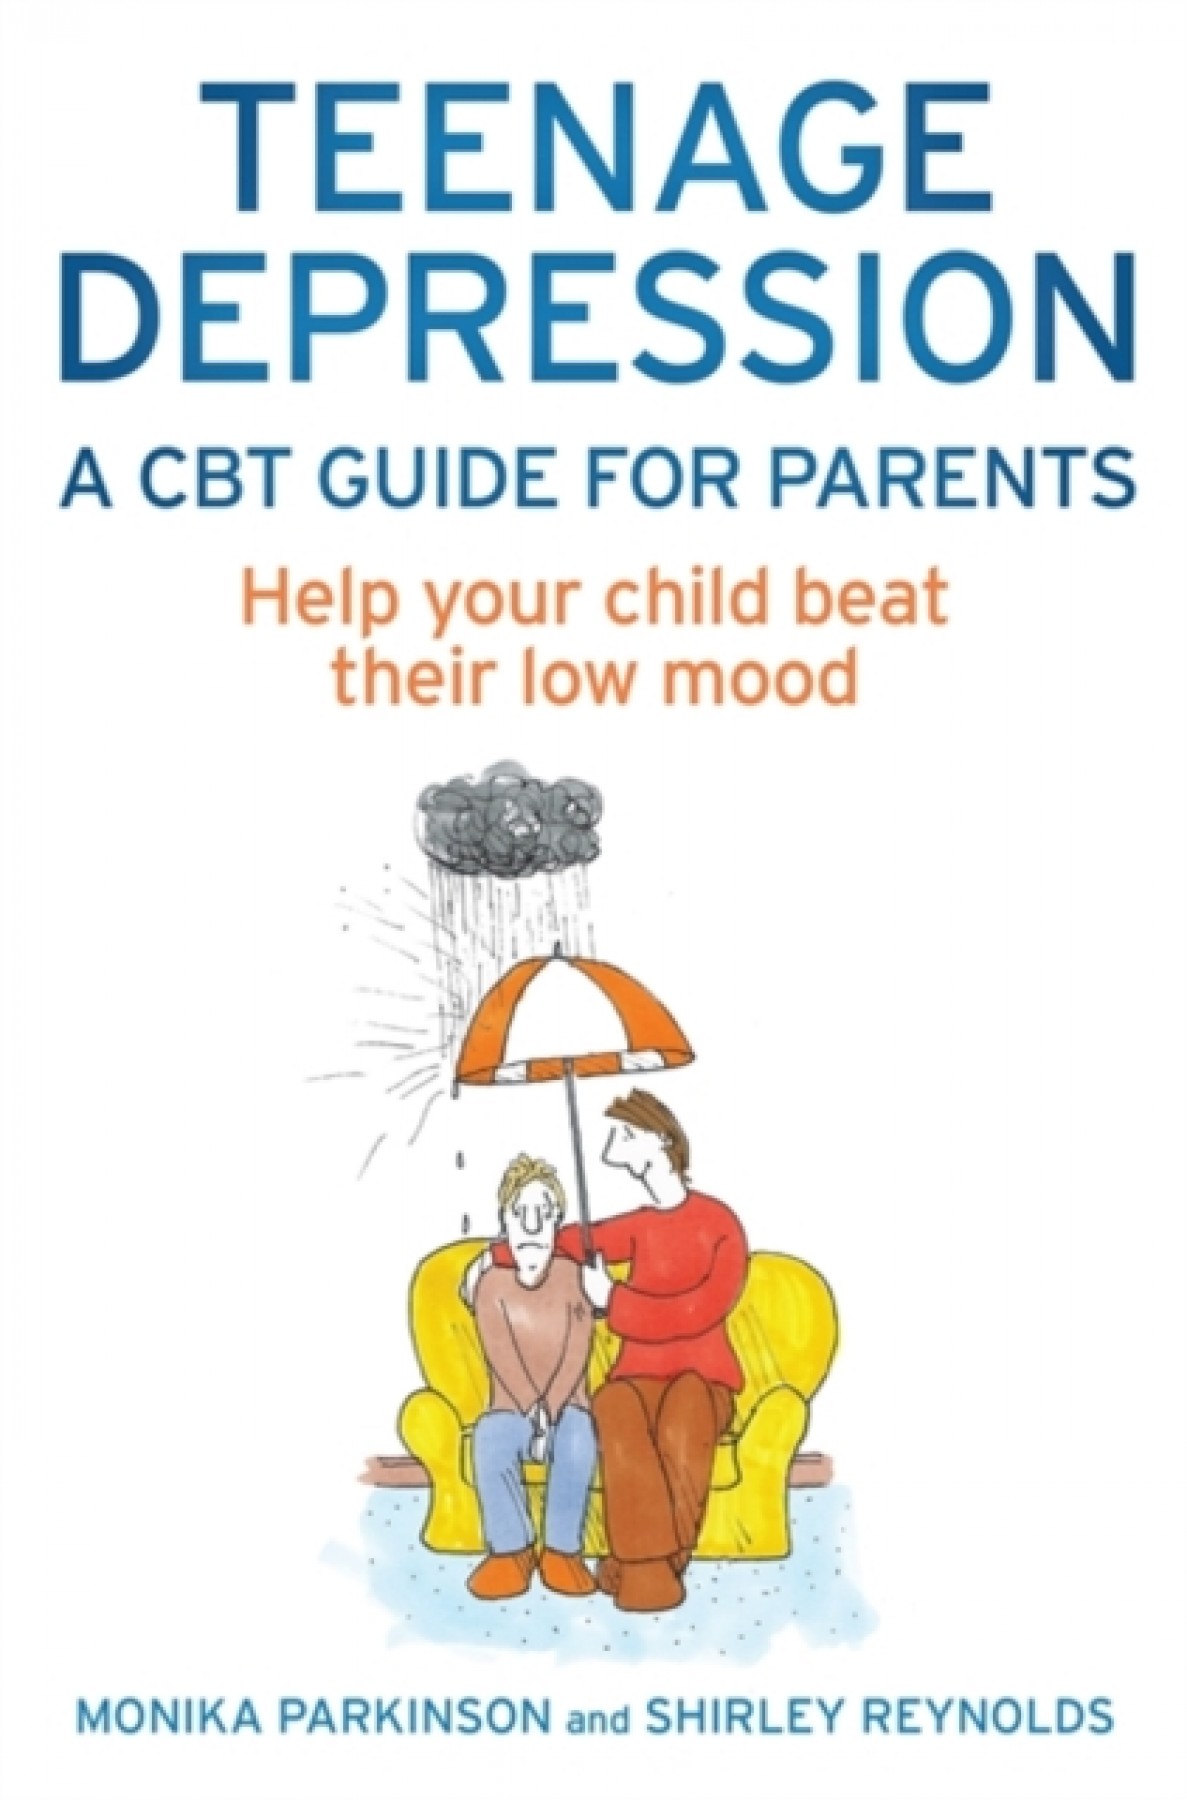 Teenage Depression, A CBT Guide for Parents: Help your child beat their low mood